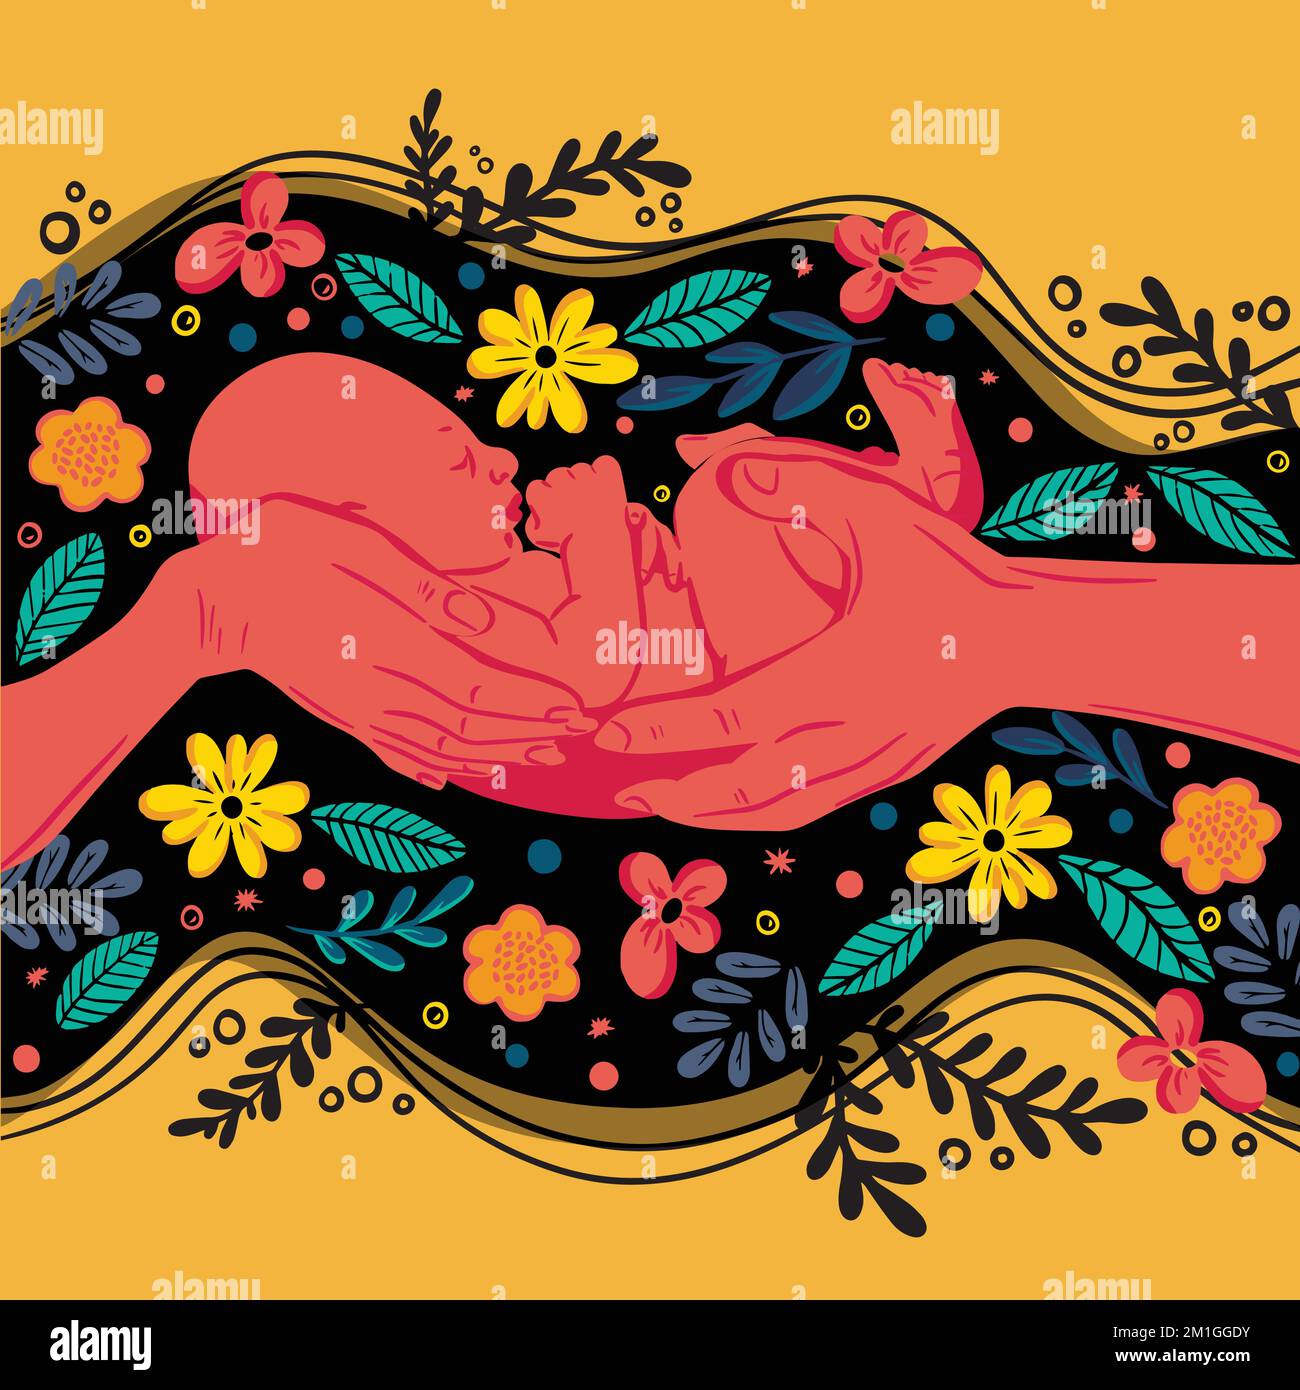 Hands of mom and dad holding a newborn baby among the flower arrangement. Concept of parenthood, new baby, newborn, motherhood and fatherhood. Happy Stock Vector